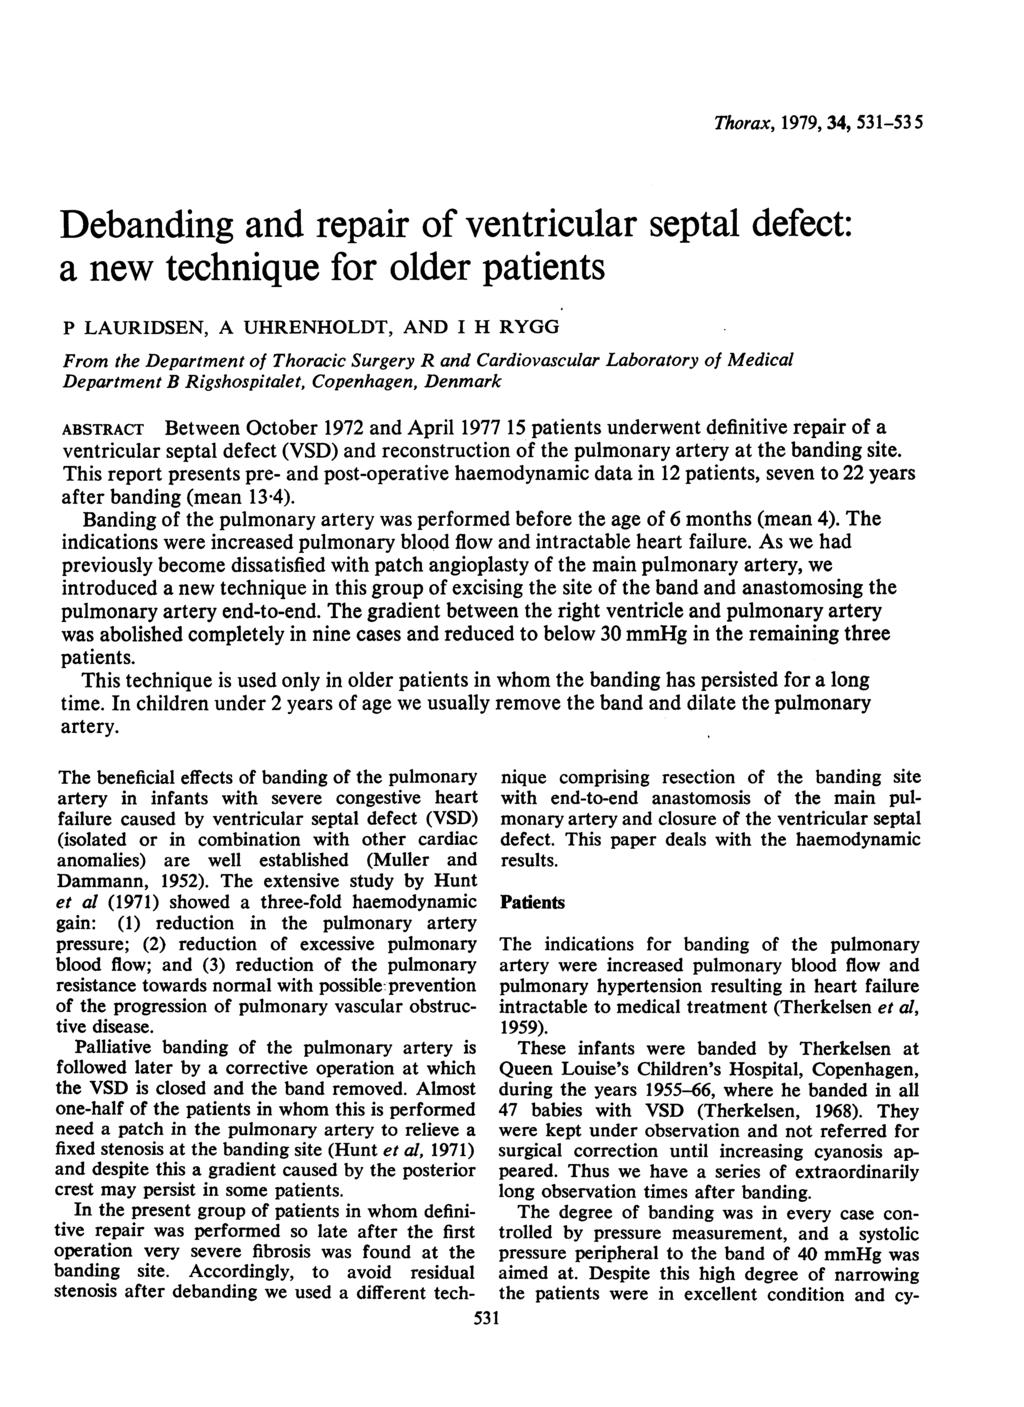 Thorax, 1979, 34, 531-53 5 Debanding and repair of ventricular septal defect: a new technique for older patients P LAURIDSEN, A UHRENHOLDT, AND I H RYGG From the Department of Thoracic Surgery R and